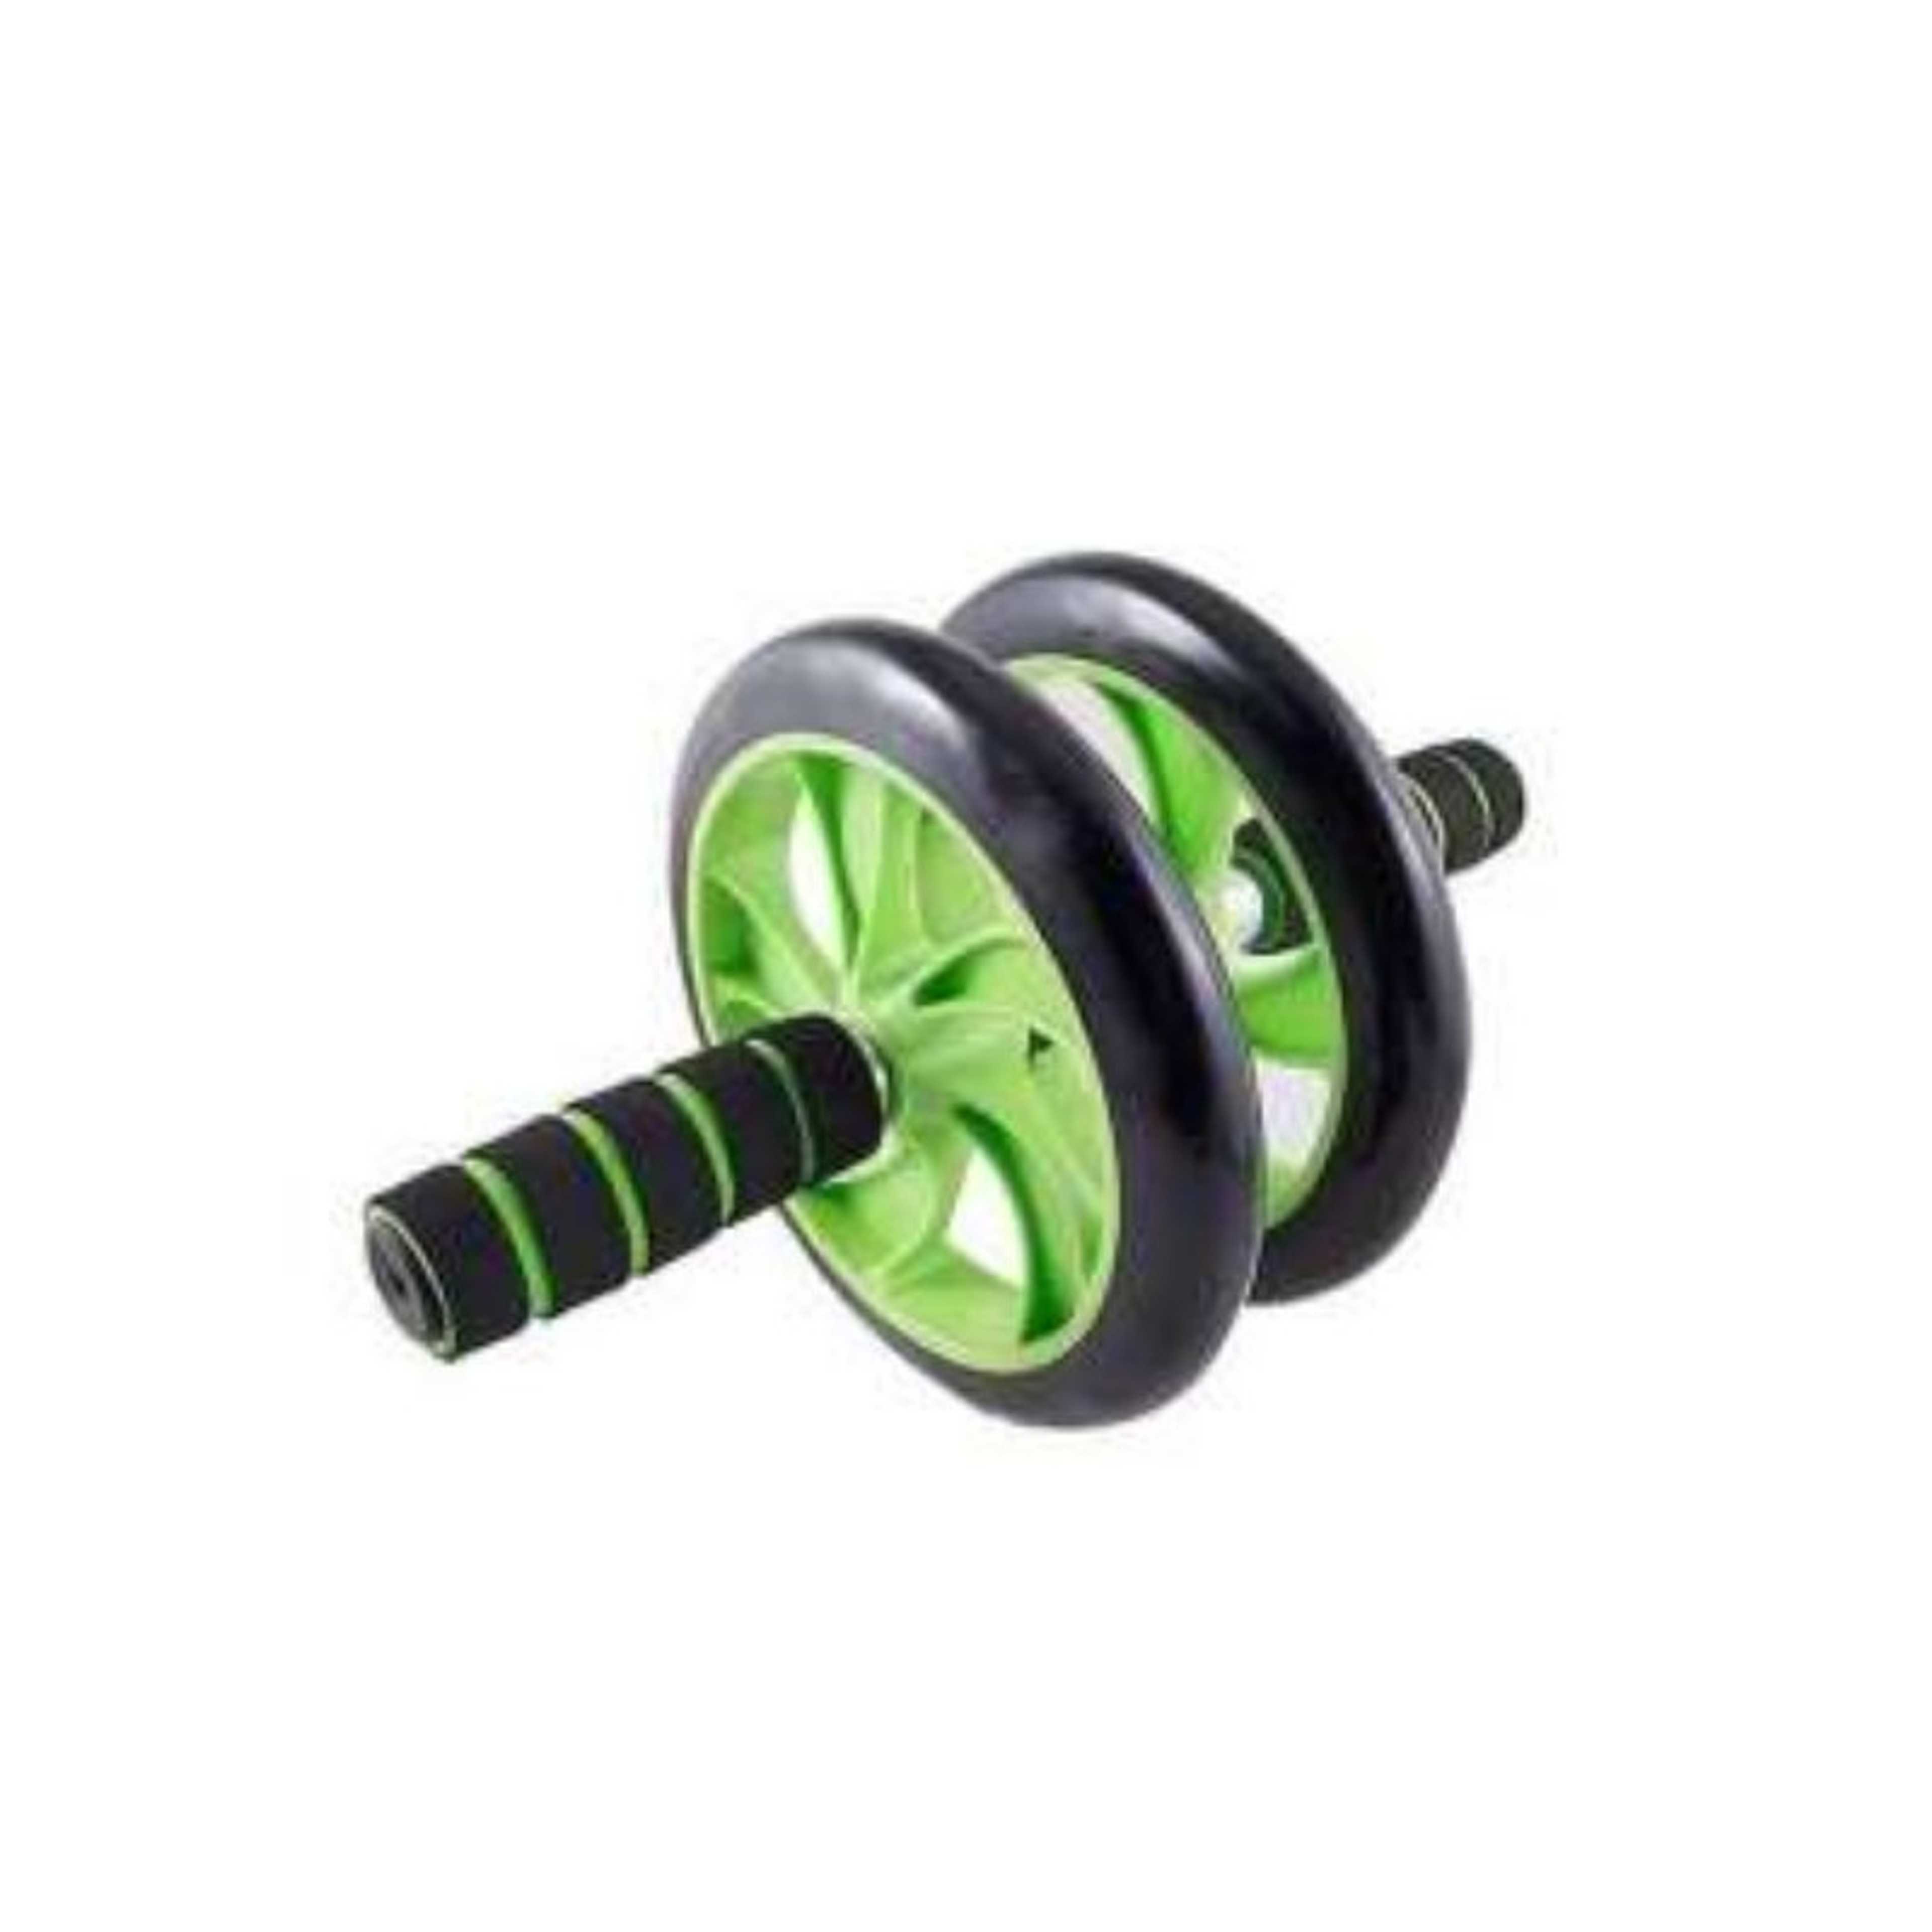 Pack of 2: Super Arms Exerciser with Abs Roller